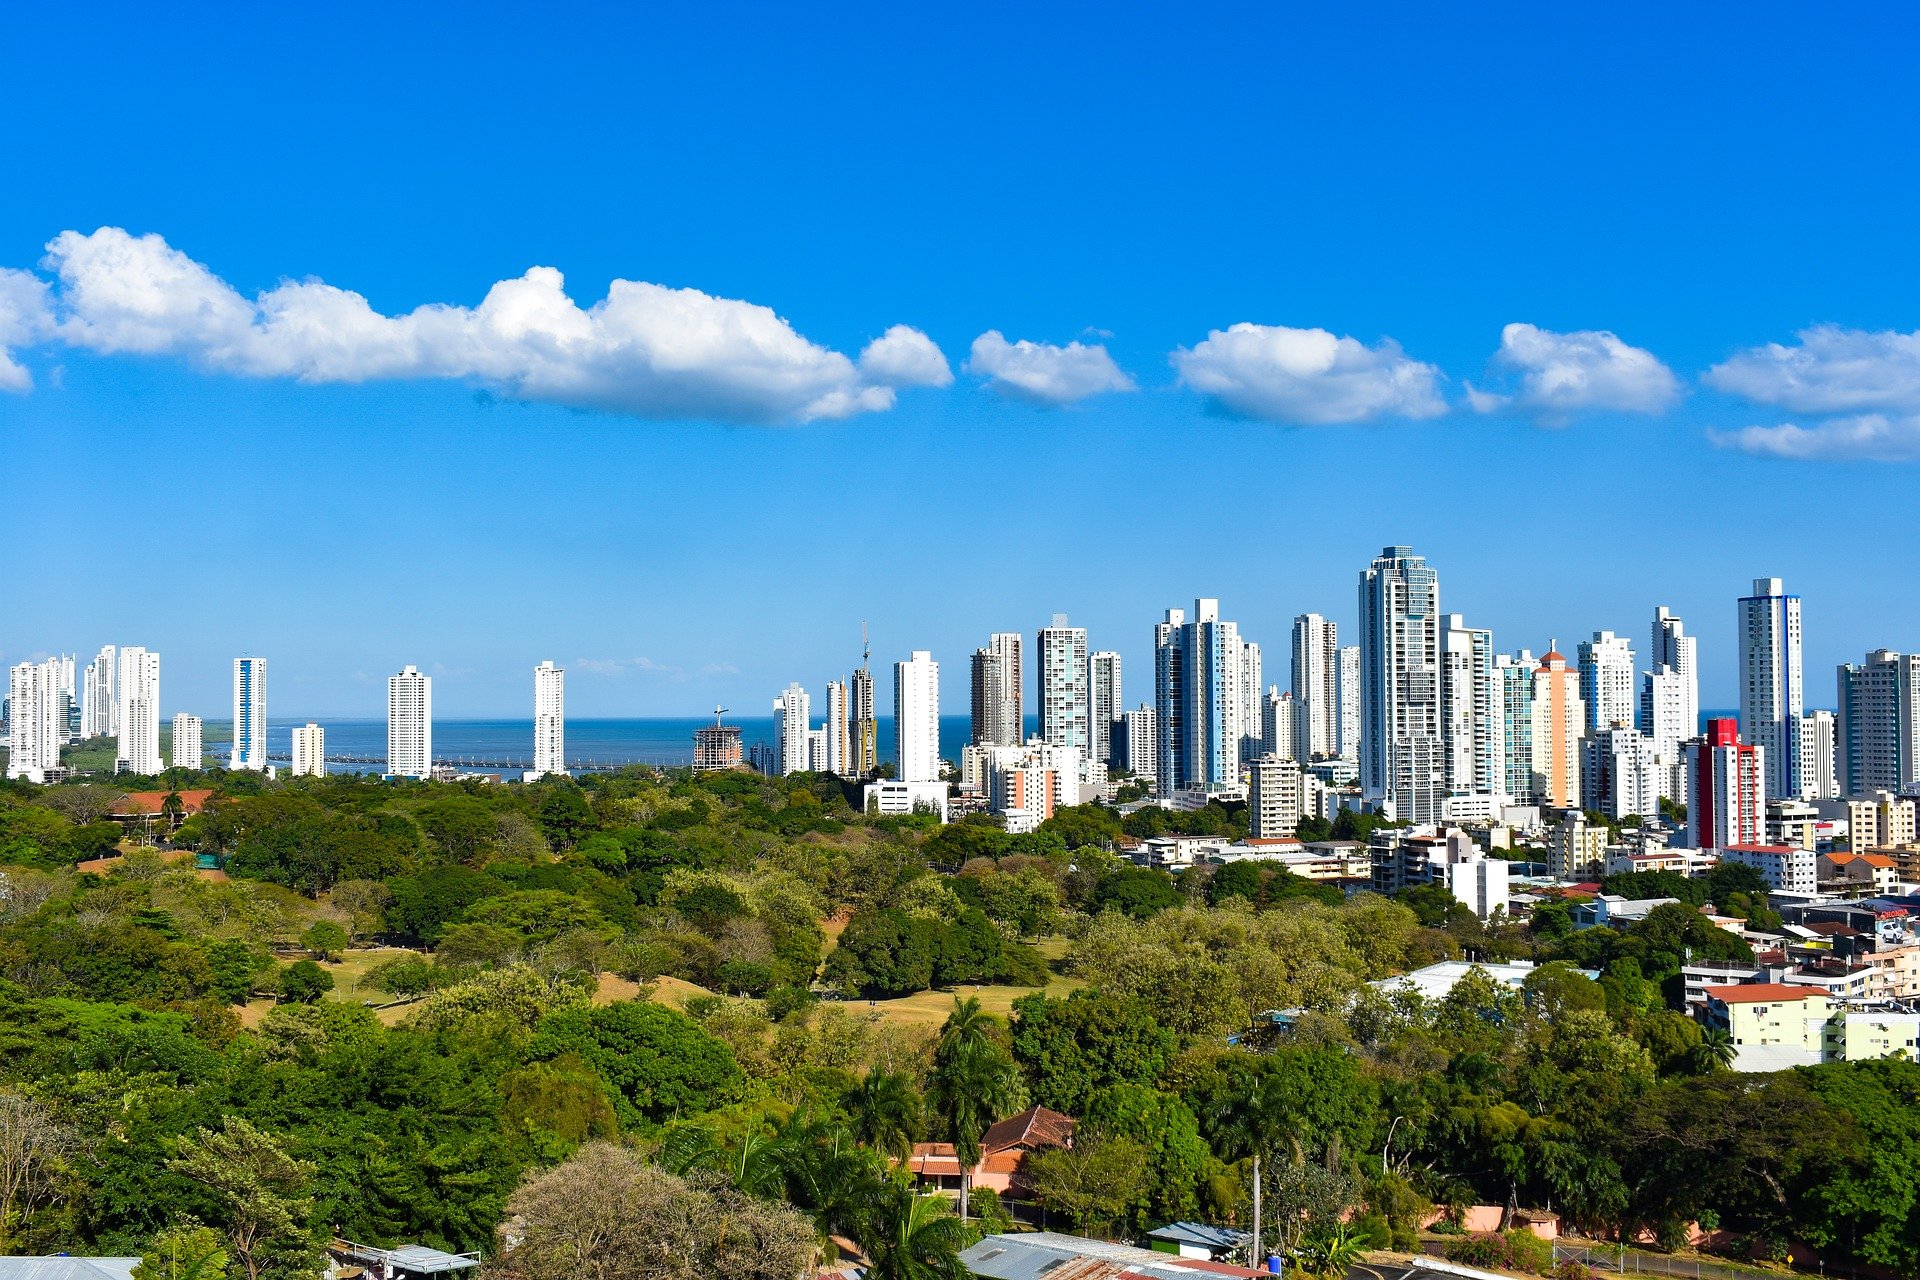 Panama Real Estate Market 2022: Opportunities ahead